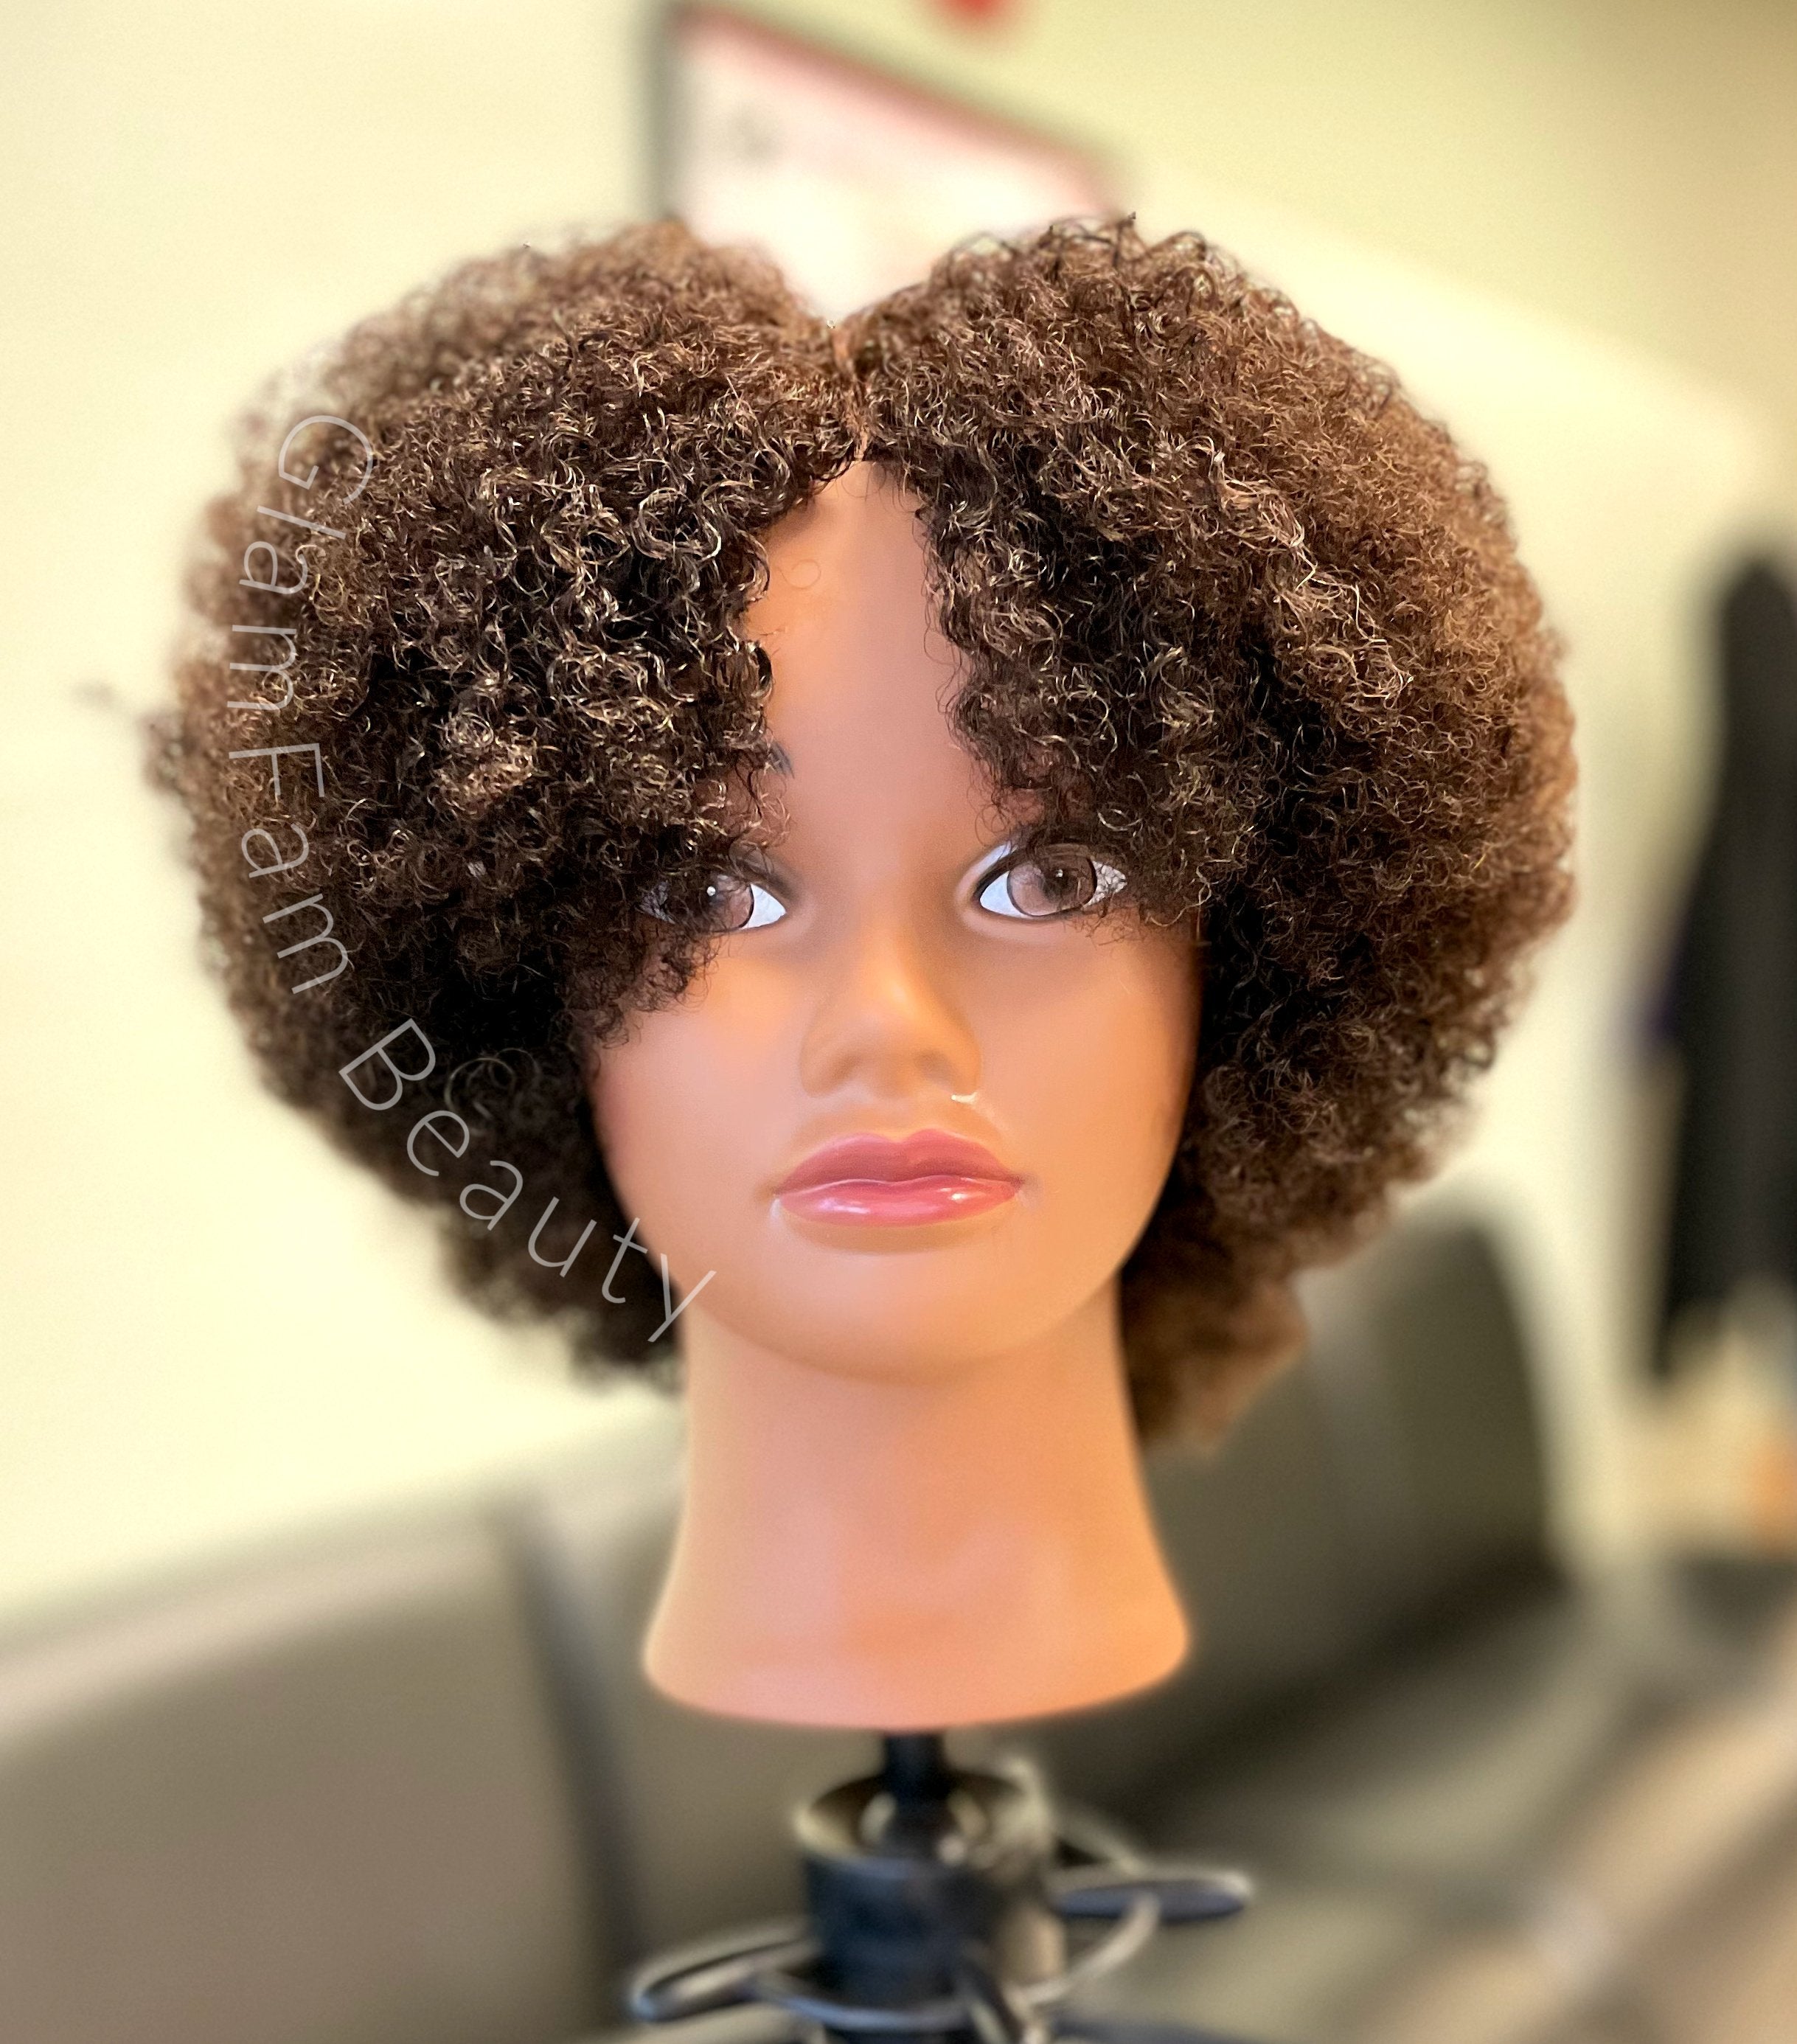 New Bald Afro Mannequin Head Without Hair For Making Wigs Hair